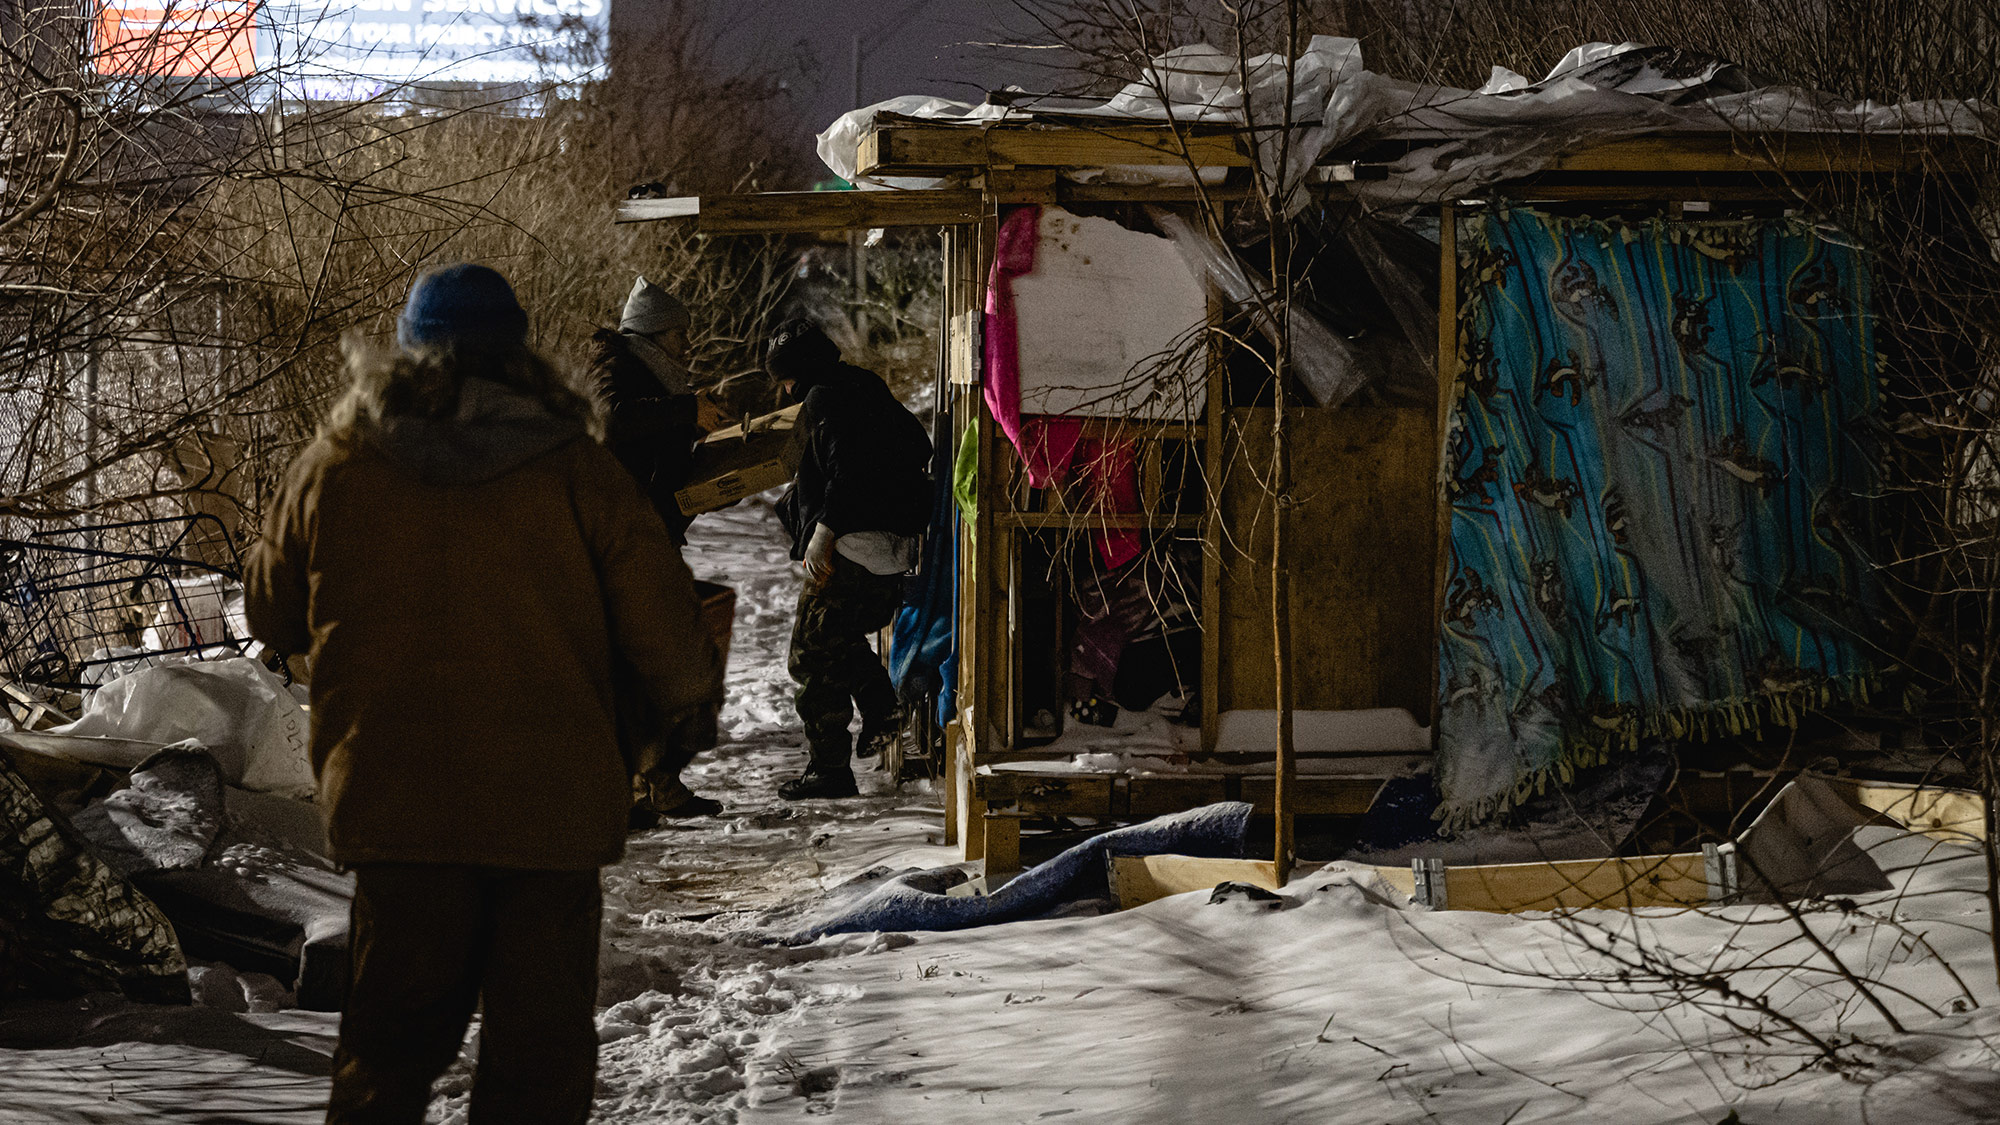 An outreach worker delivers supplies to people living in a homeless camp in Louisville, Kentucky, on December 23. 